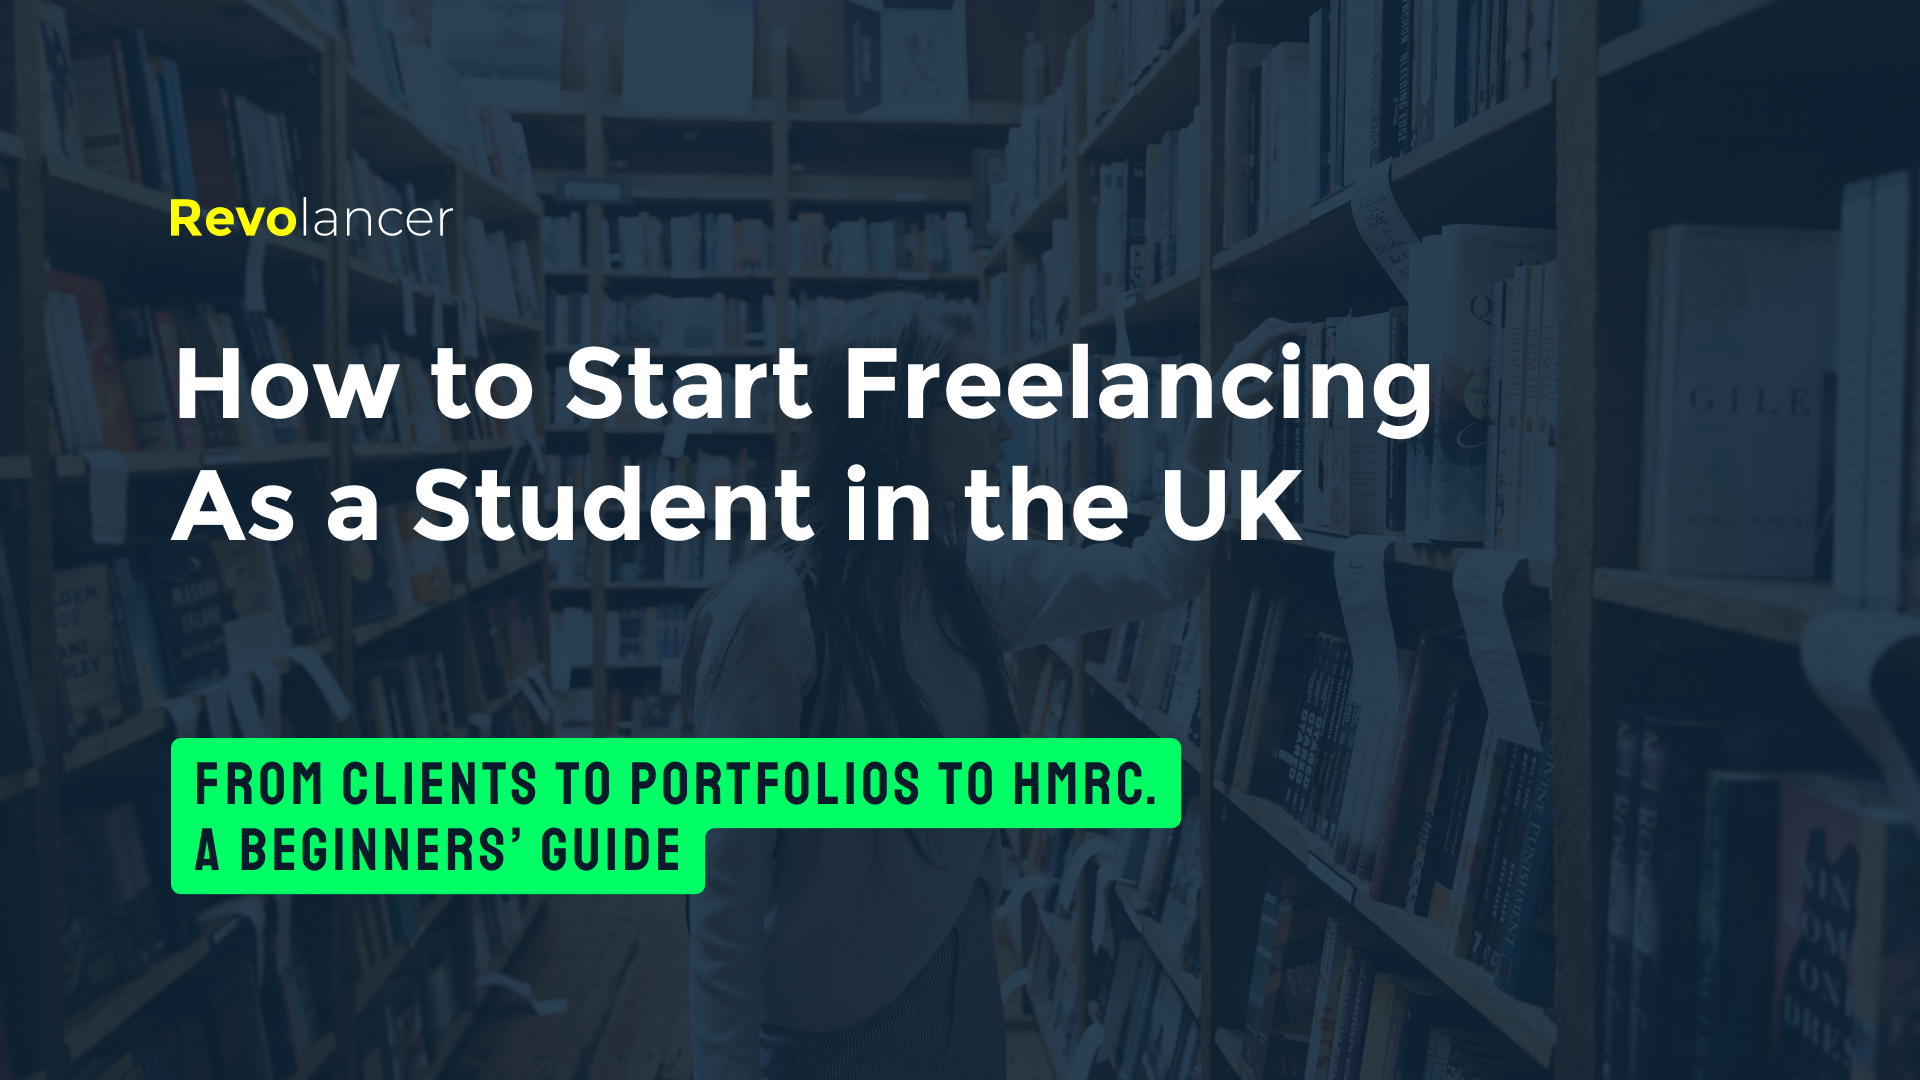 How to Start Freelancing as a Student